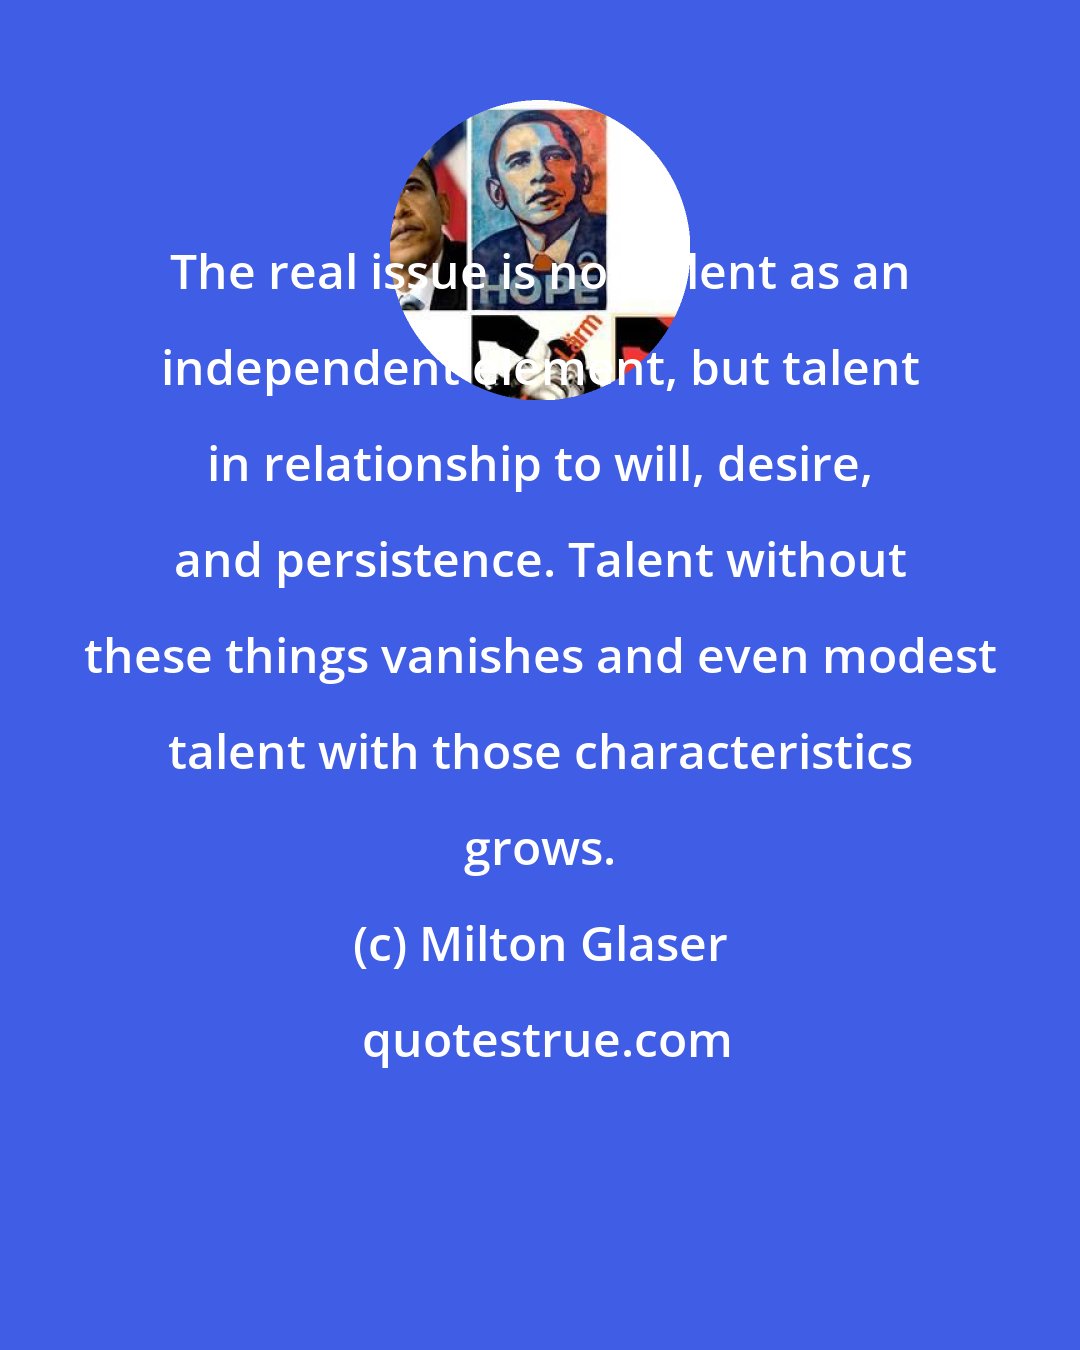 Milton Glaser: The real issue is not talent as an independent element, but talent in relationship to will, desire, and persistence. Talent without these things vanishes and even modest talent with those characteristics grows.